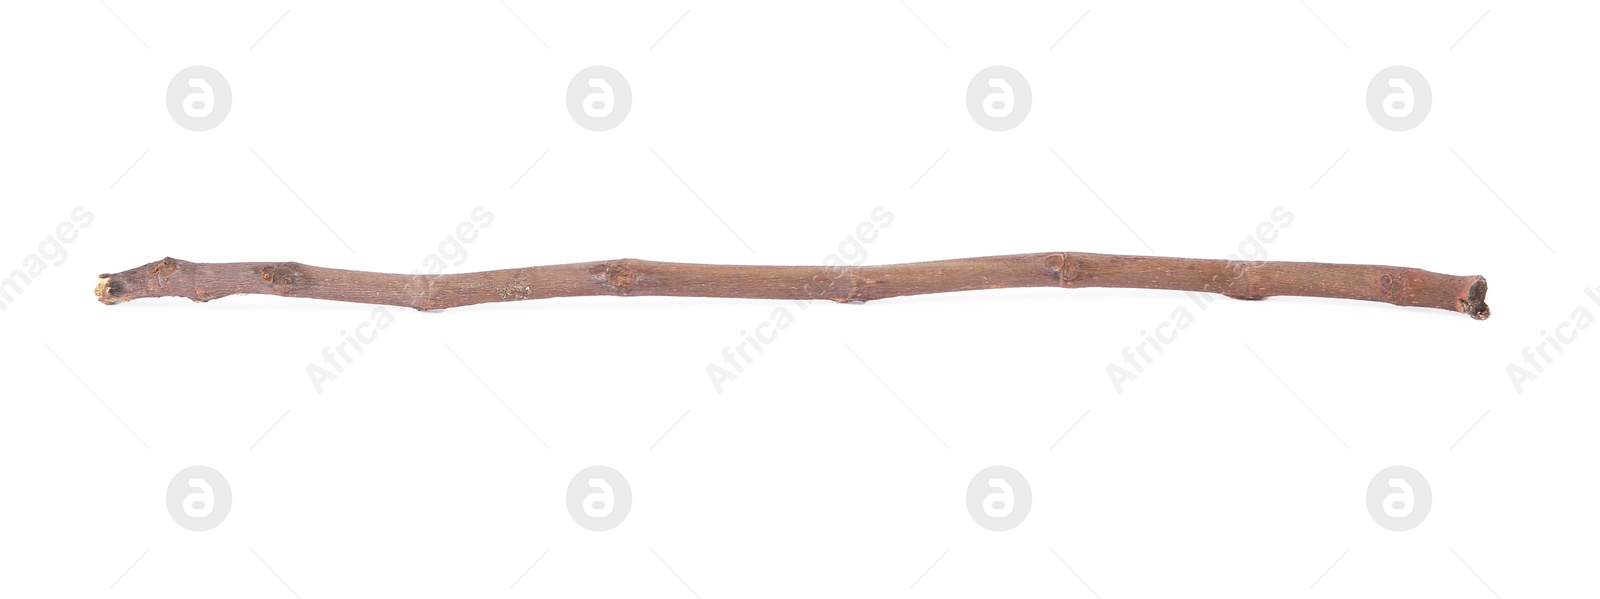 Photo of Old dry tree twig isolated on white